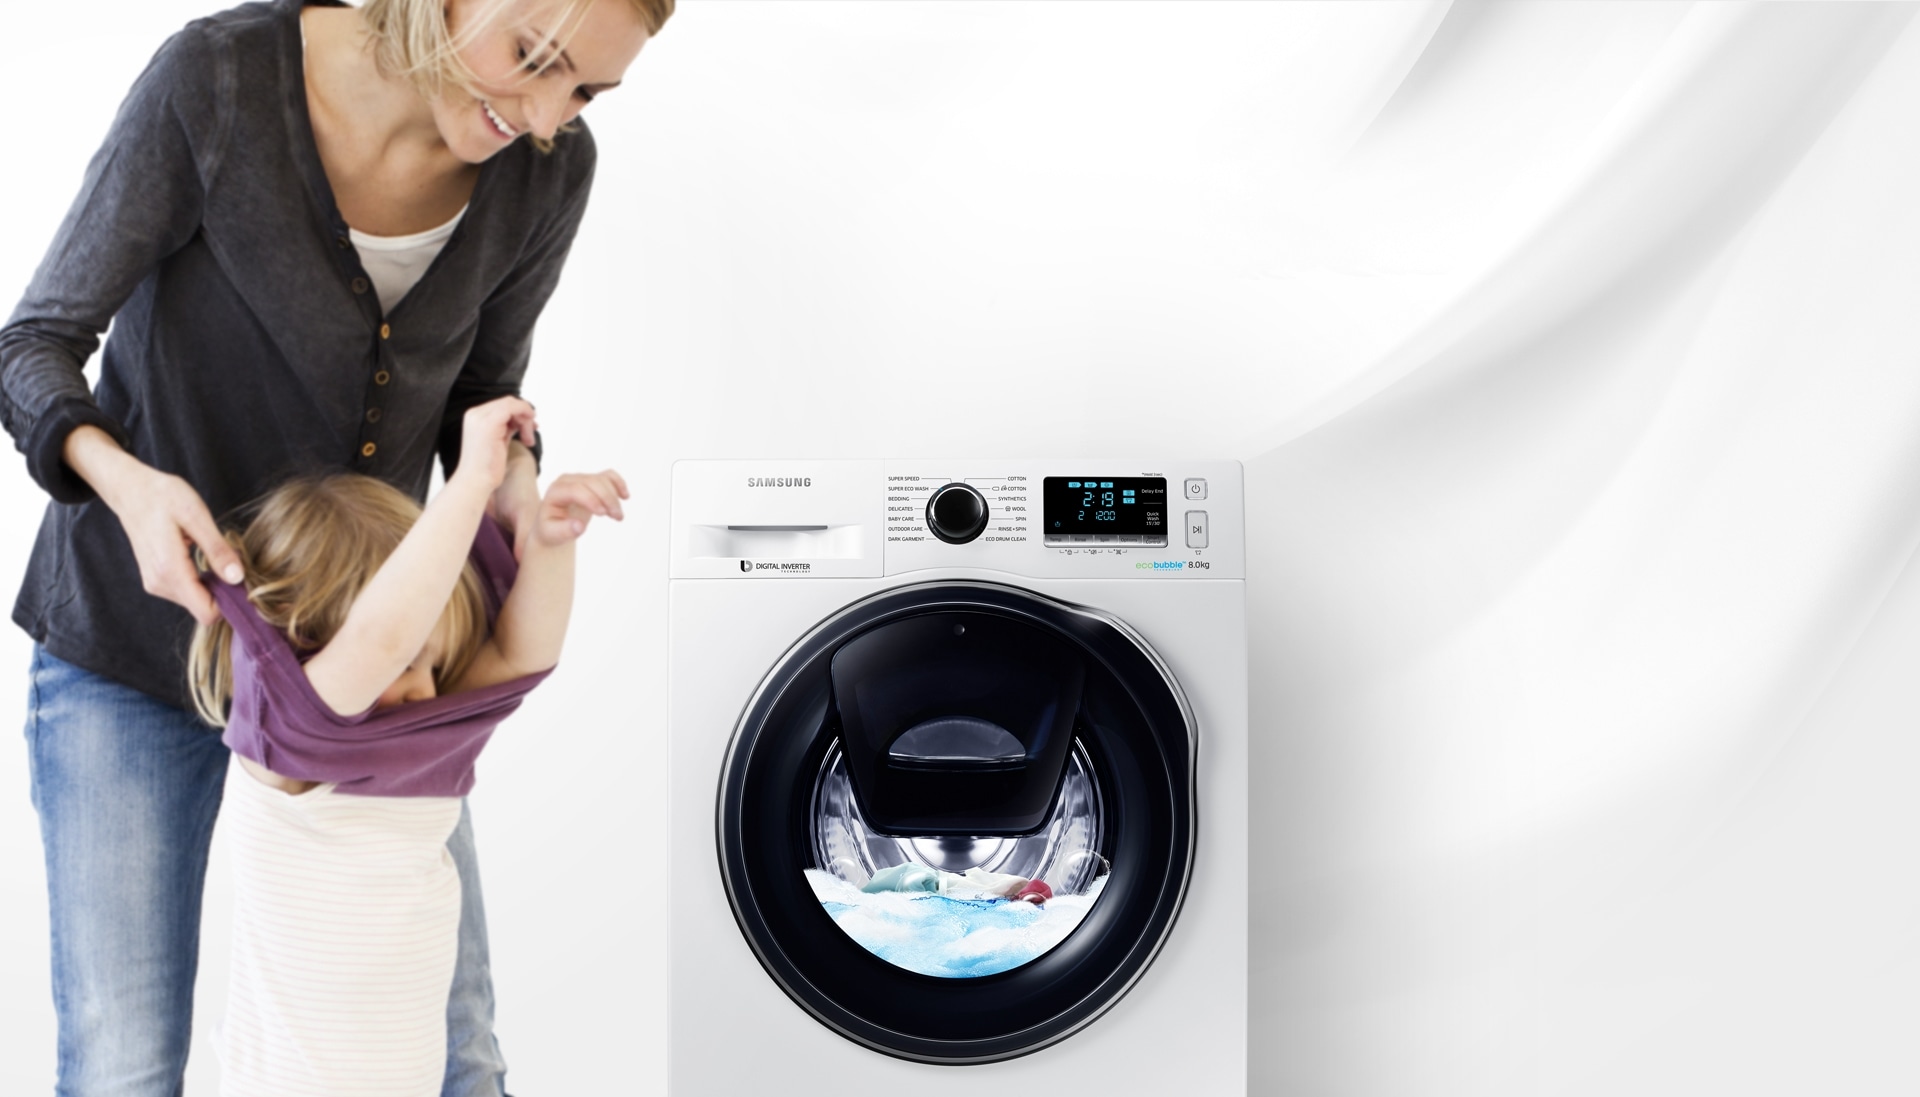 An image of a woman taking off her child's clothes next to a WW7500 washing machine which is in the middle of a cycle.